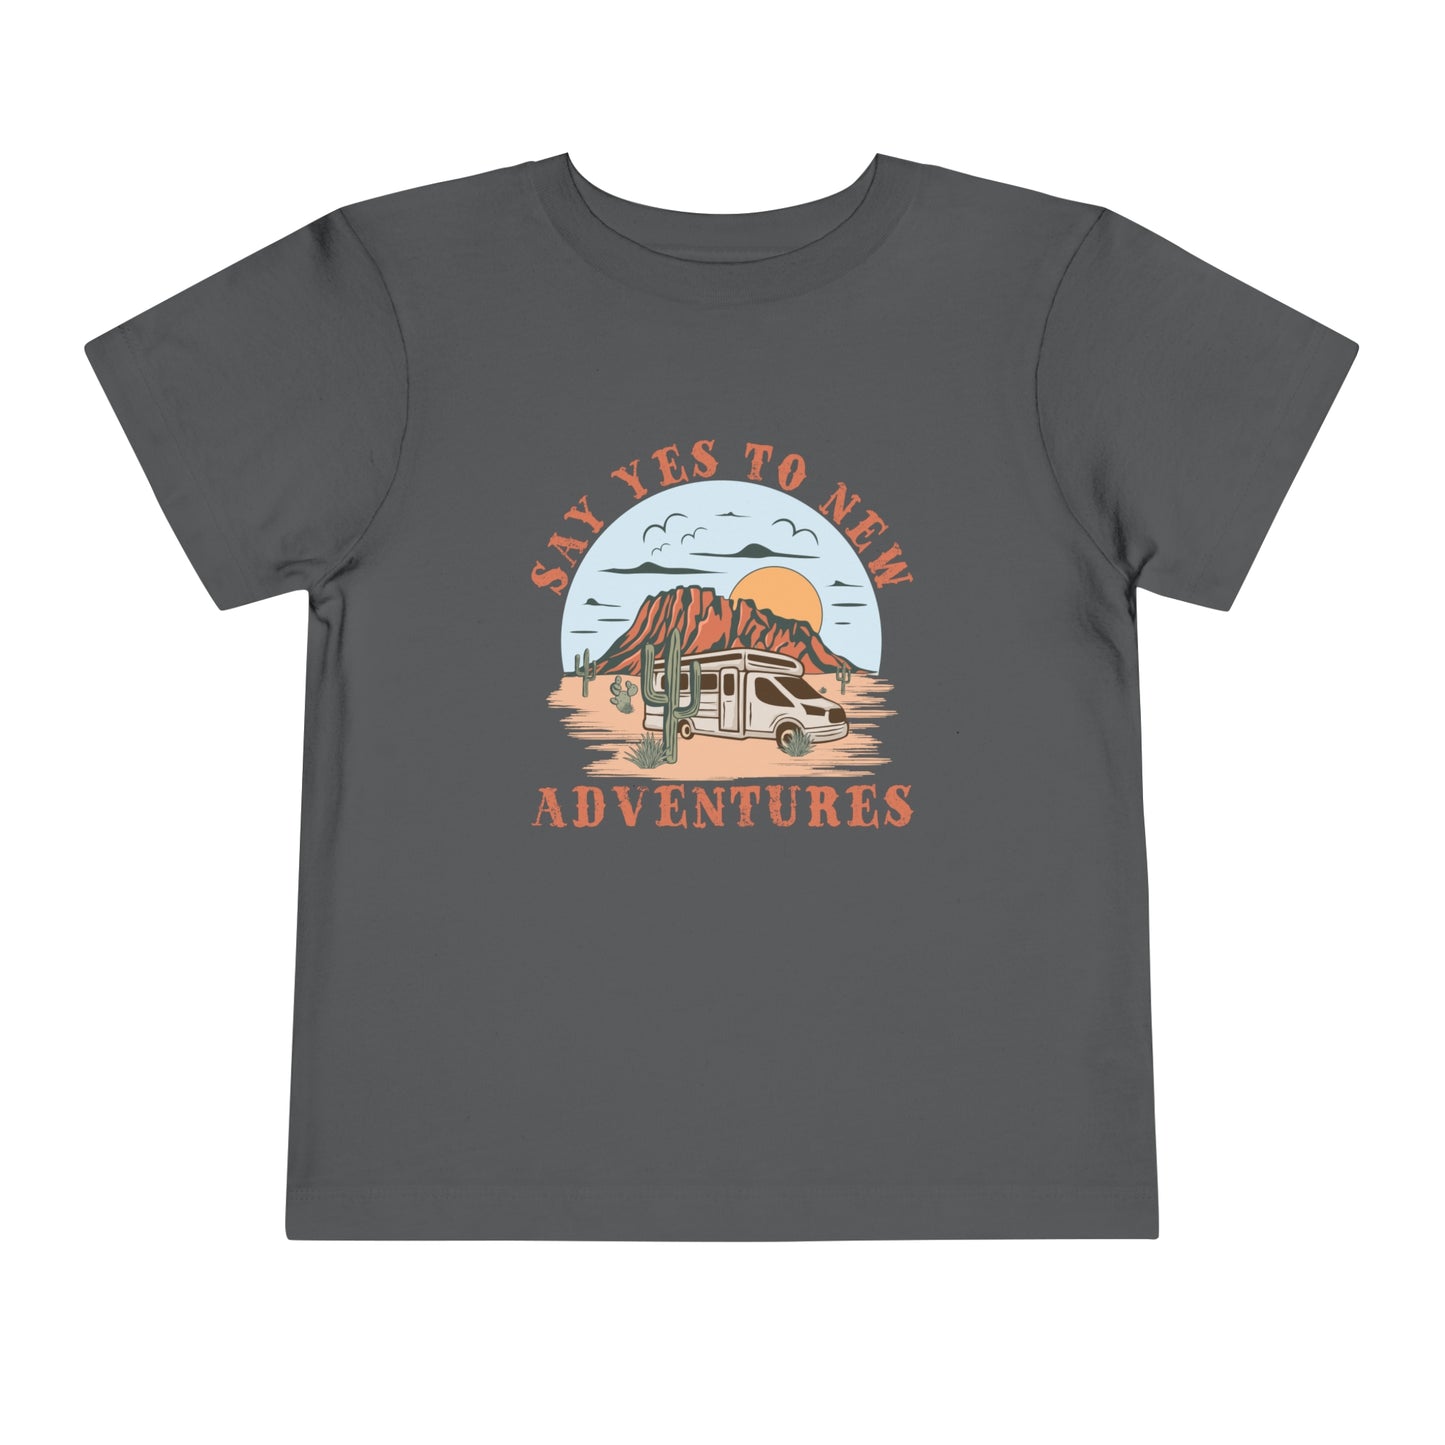 Say Yes to New Adventures | Toddler T-Shirt | Retro Western Tee